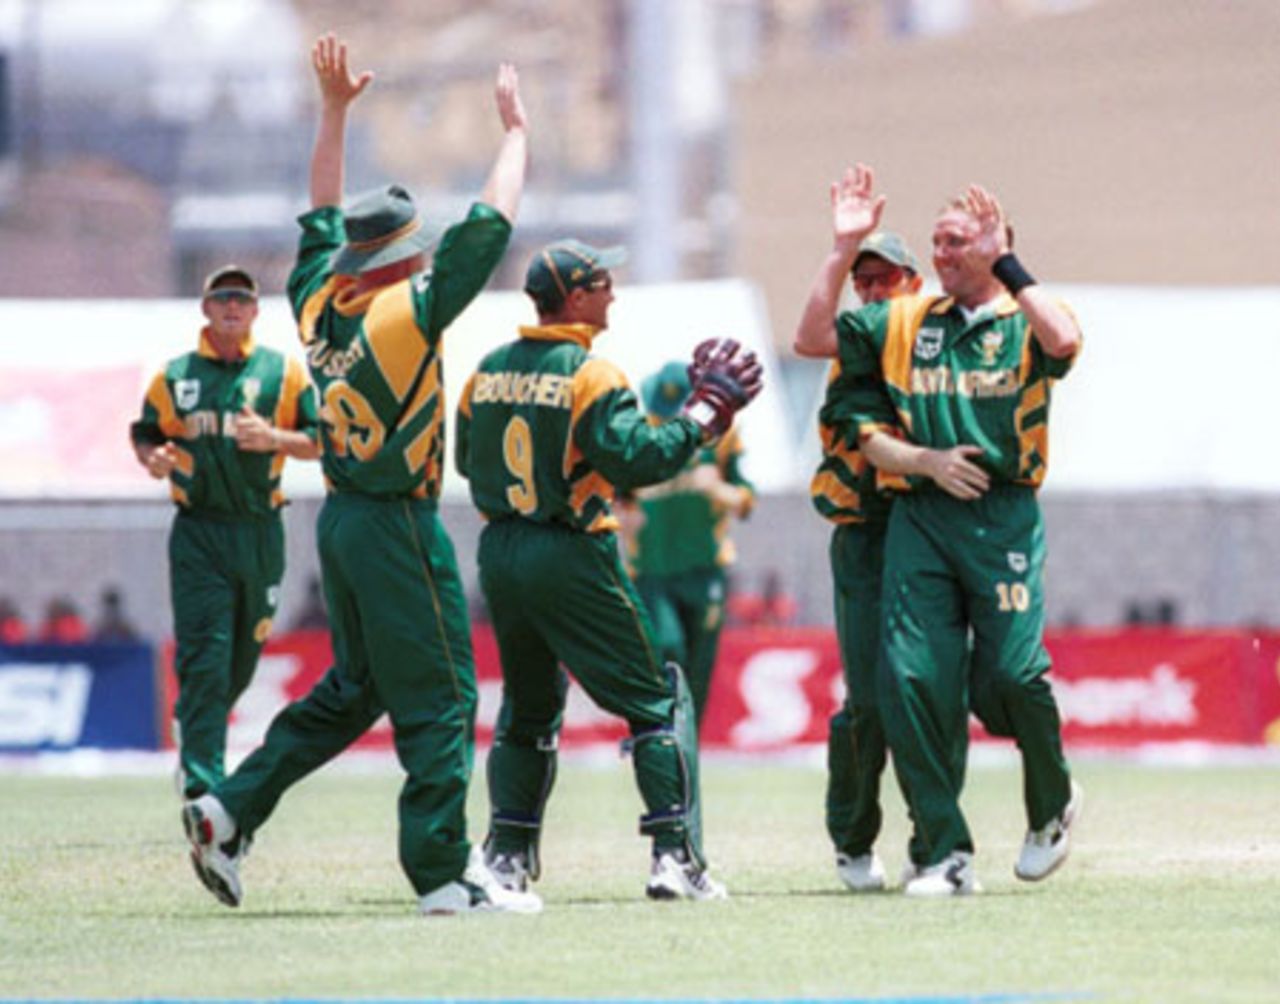 Allan Donald and team-mates celebrating, 4th ODI at Queen's Park (New) St George's, Grenada , 6th May 2001